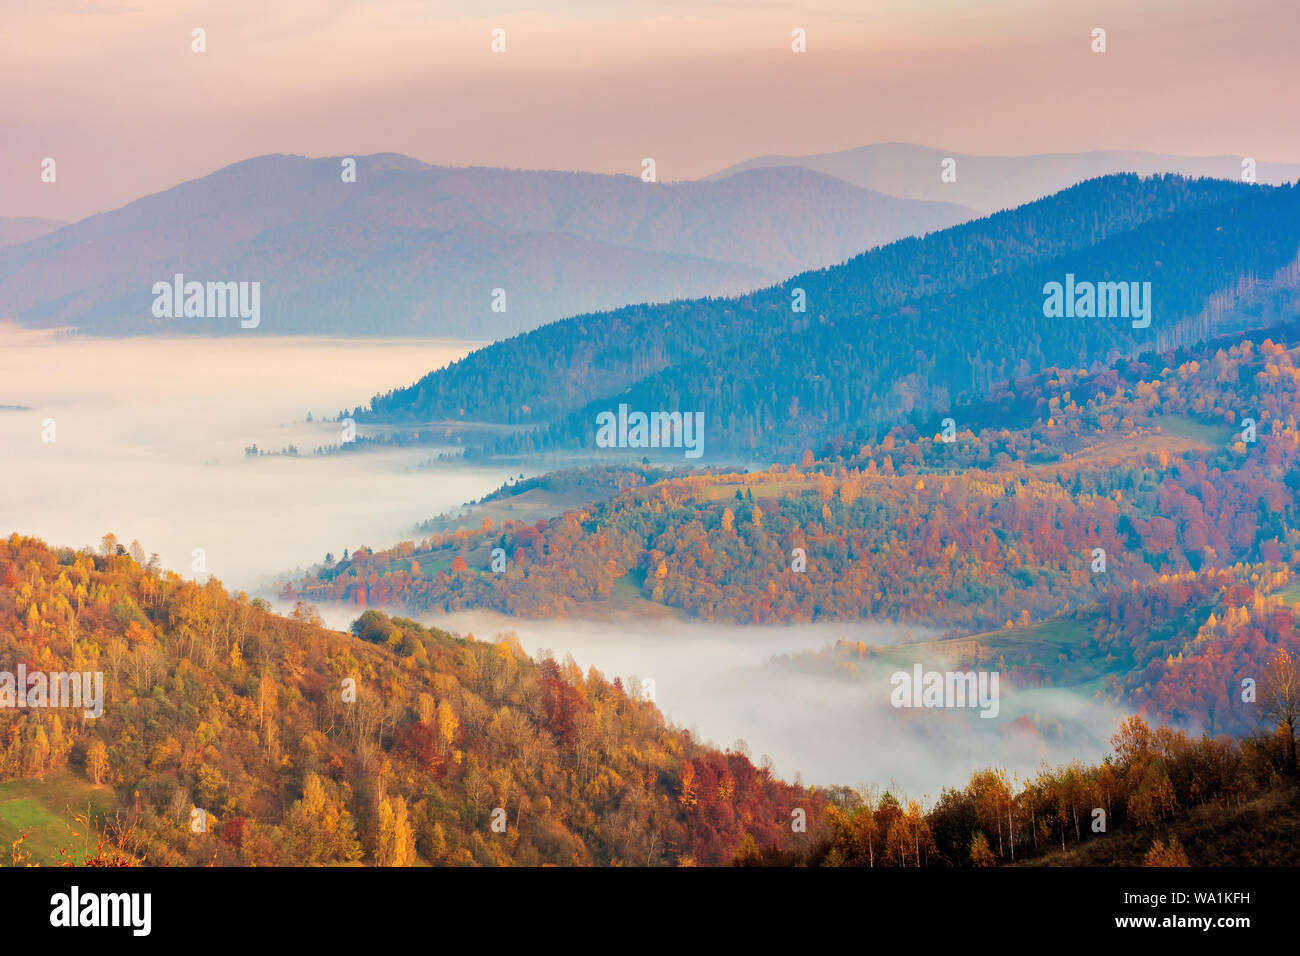 fog in the valley at sunrise. beautiful autumn scenery in mountains. forest on the hill in fall foliage. Stock Photo